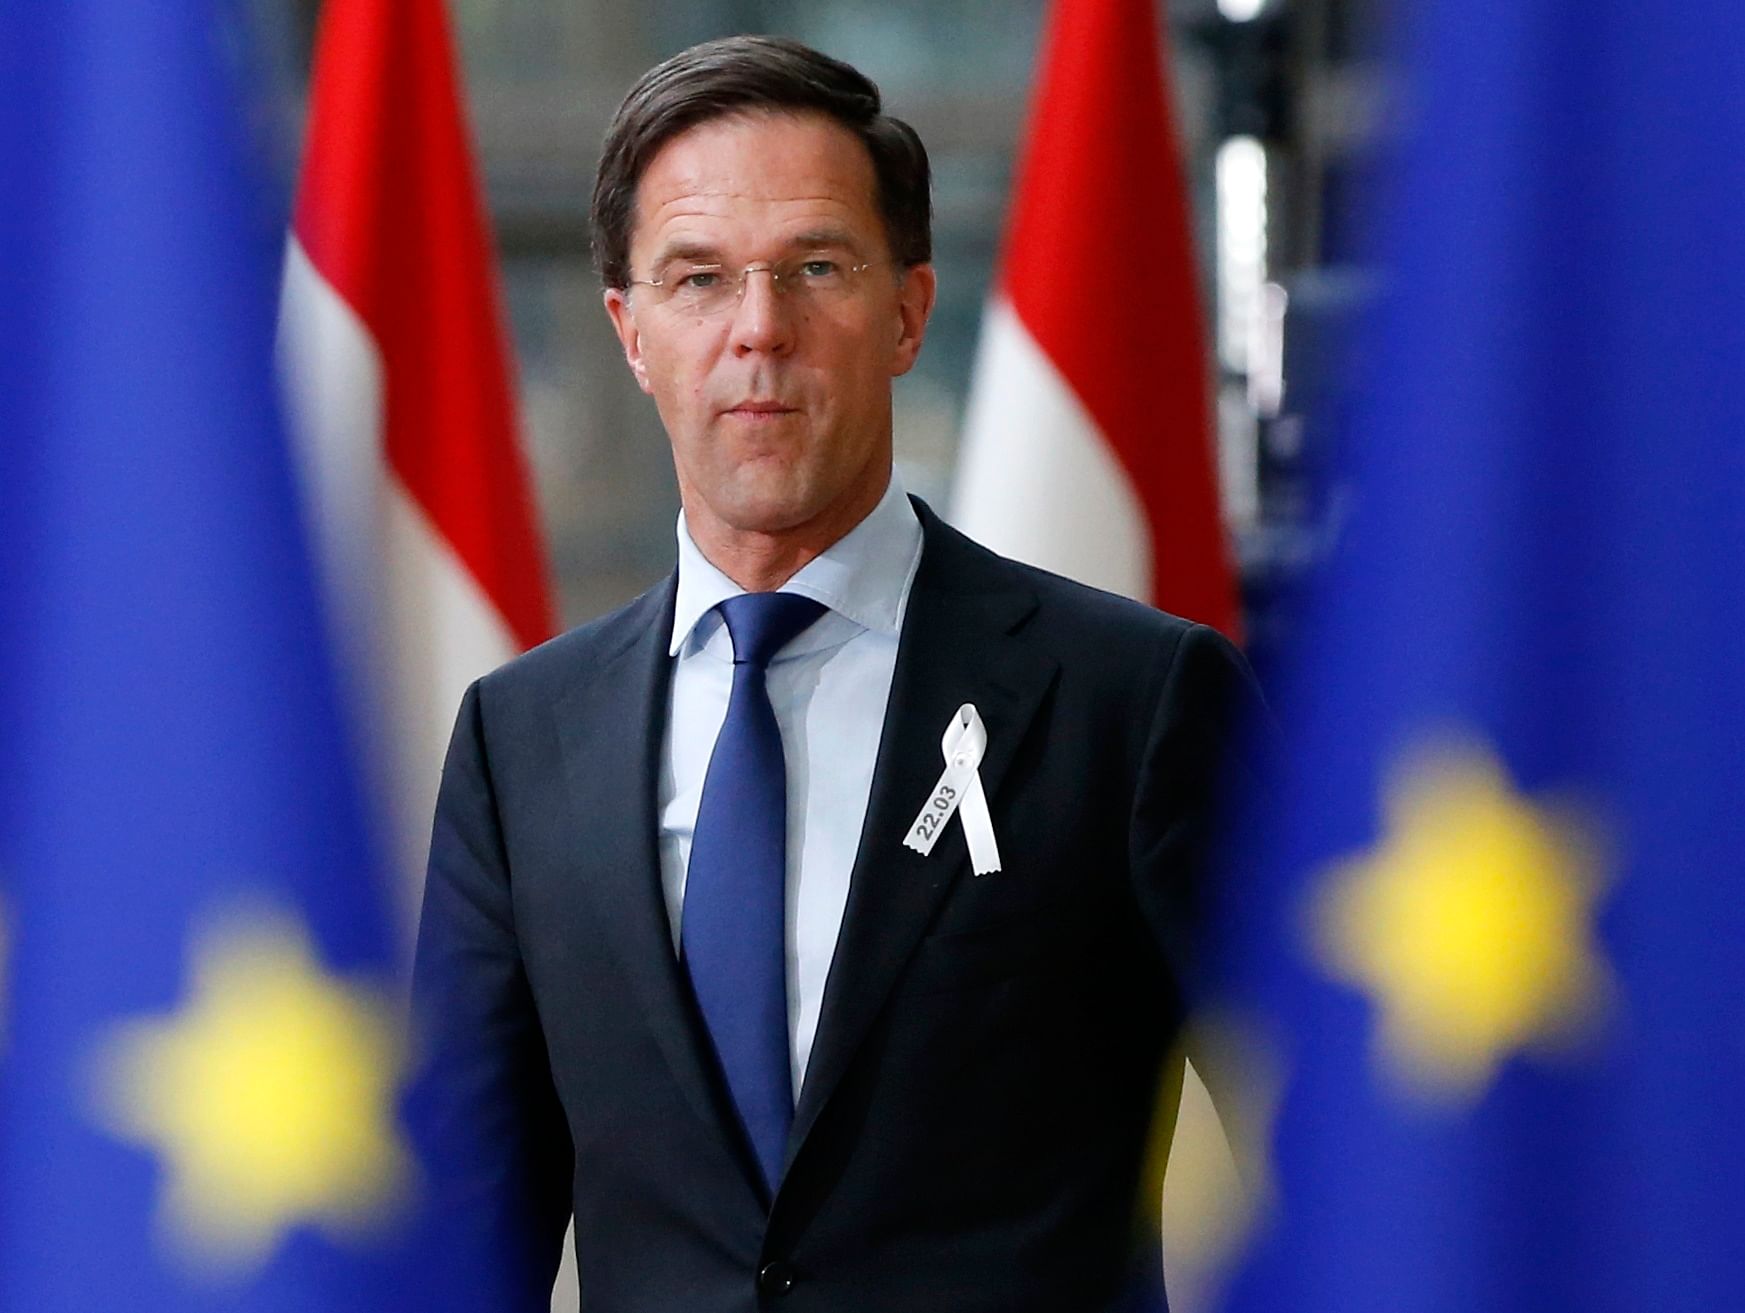 Netherlands' Prime Minister Mark Rutte will be on a two-day official visit to India from May 24. Reuters file photo